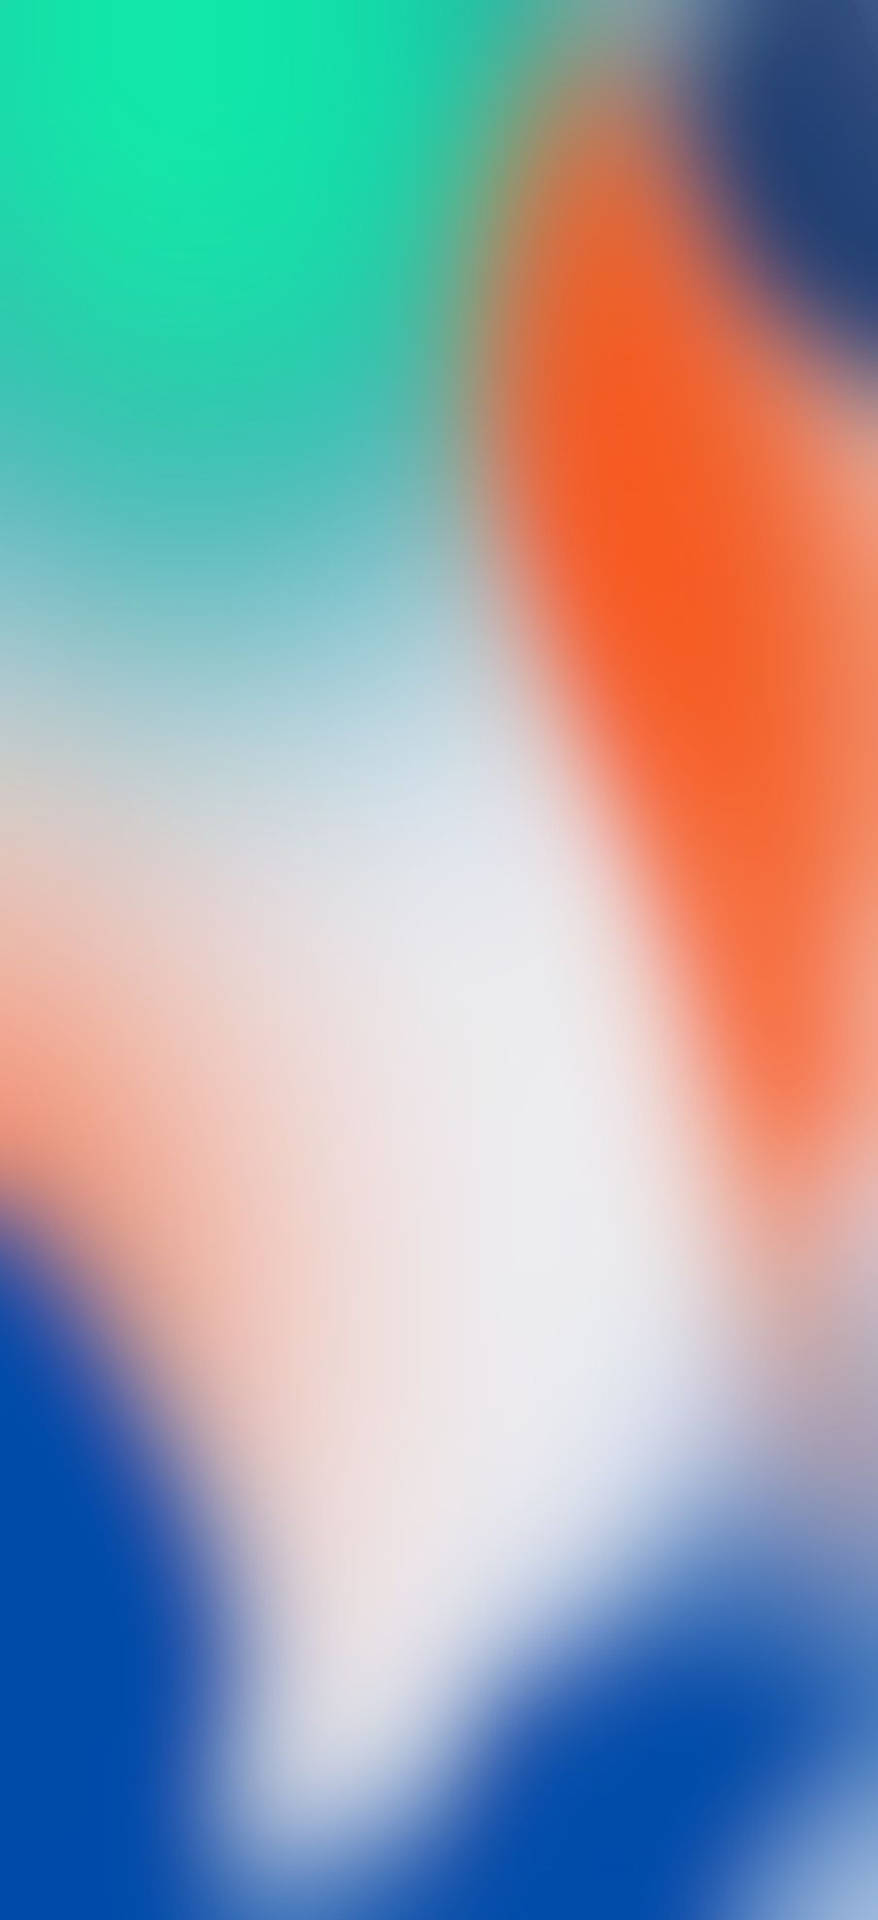 An Orange, Blue, And White Blurred Background Wallpaper